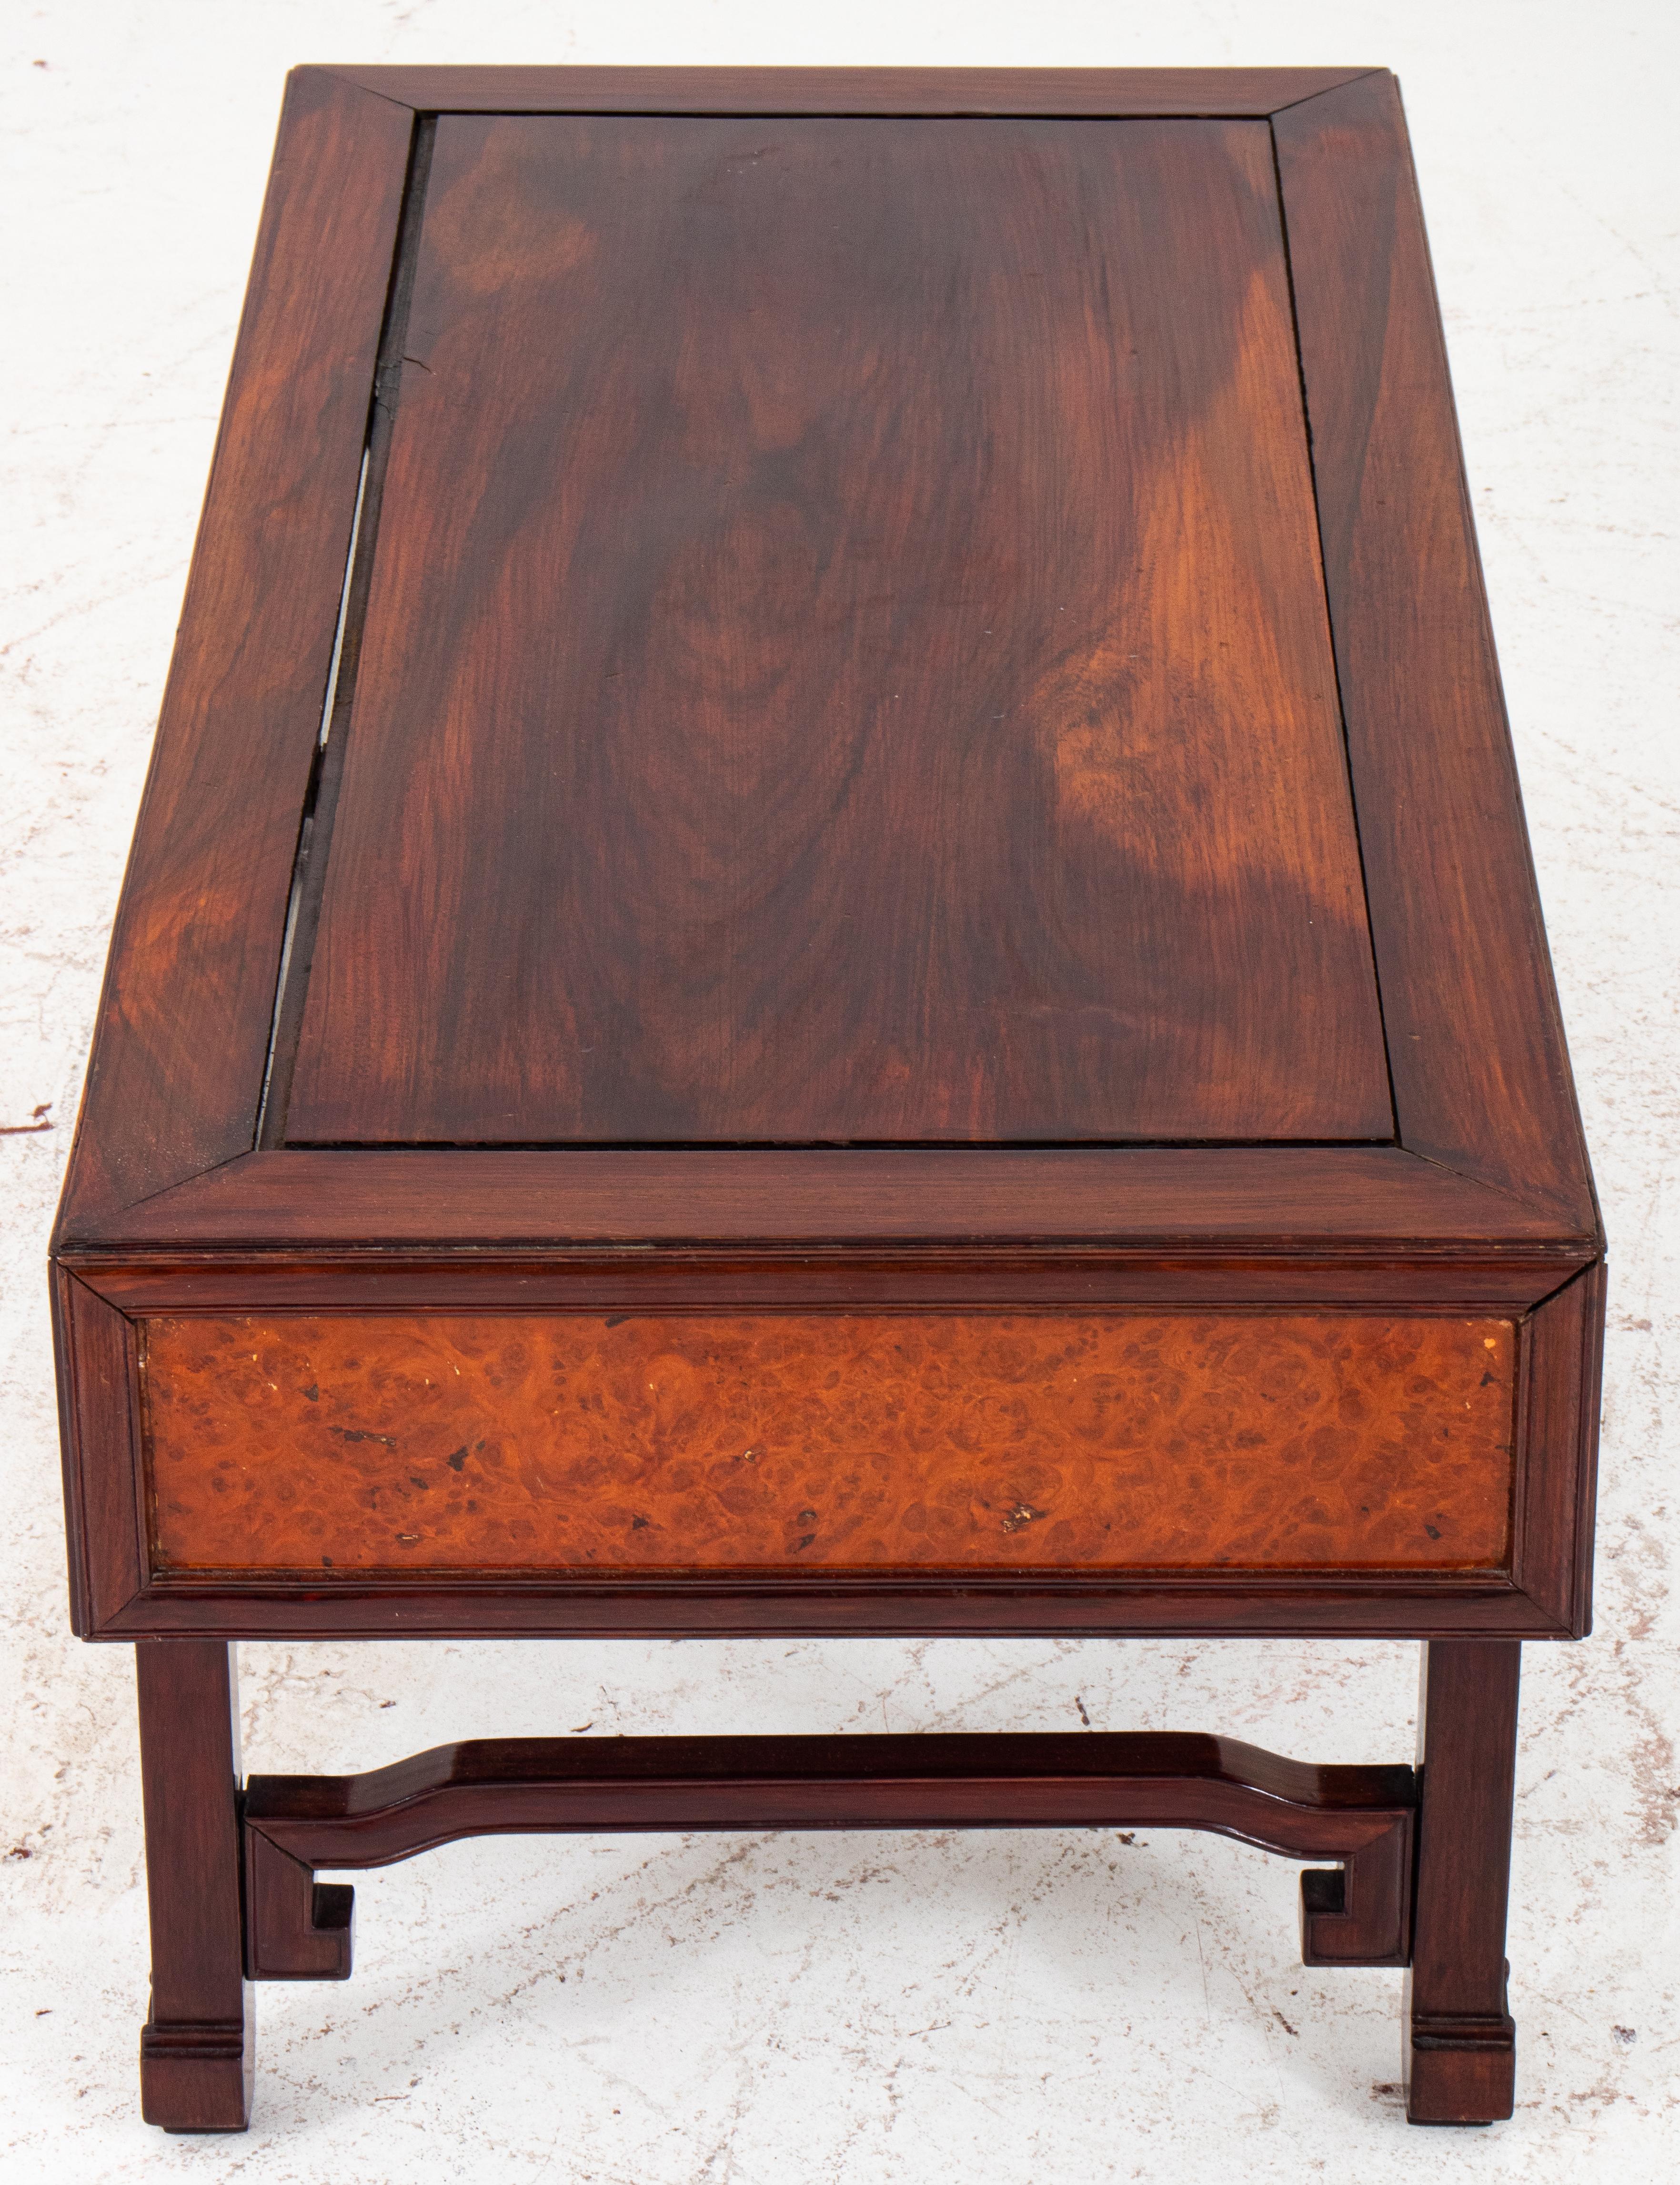 Wood Chinese Scholar's Table For Sale